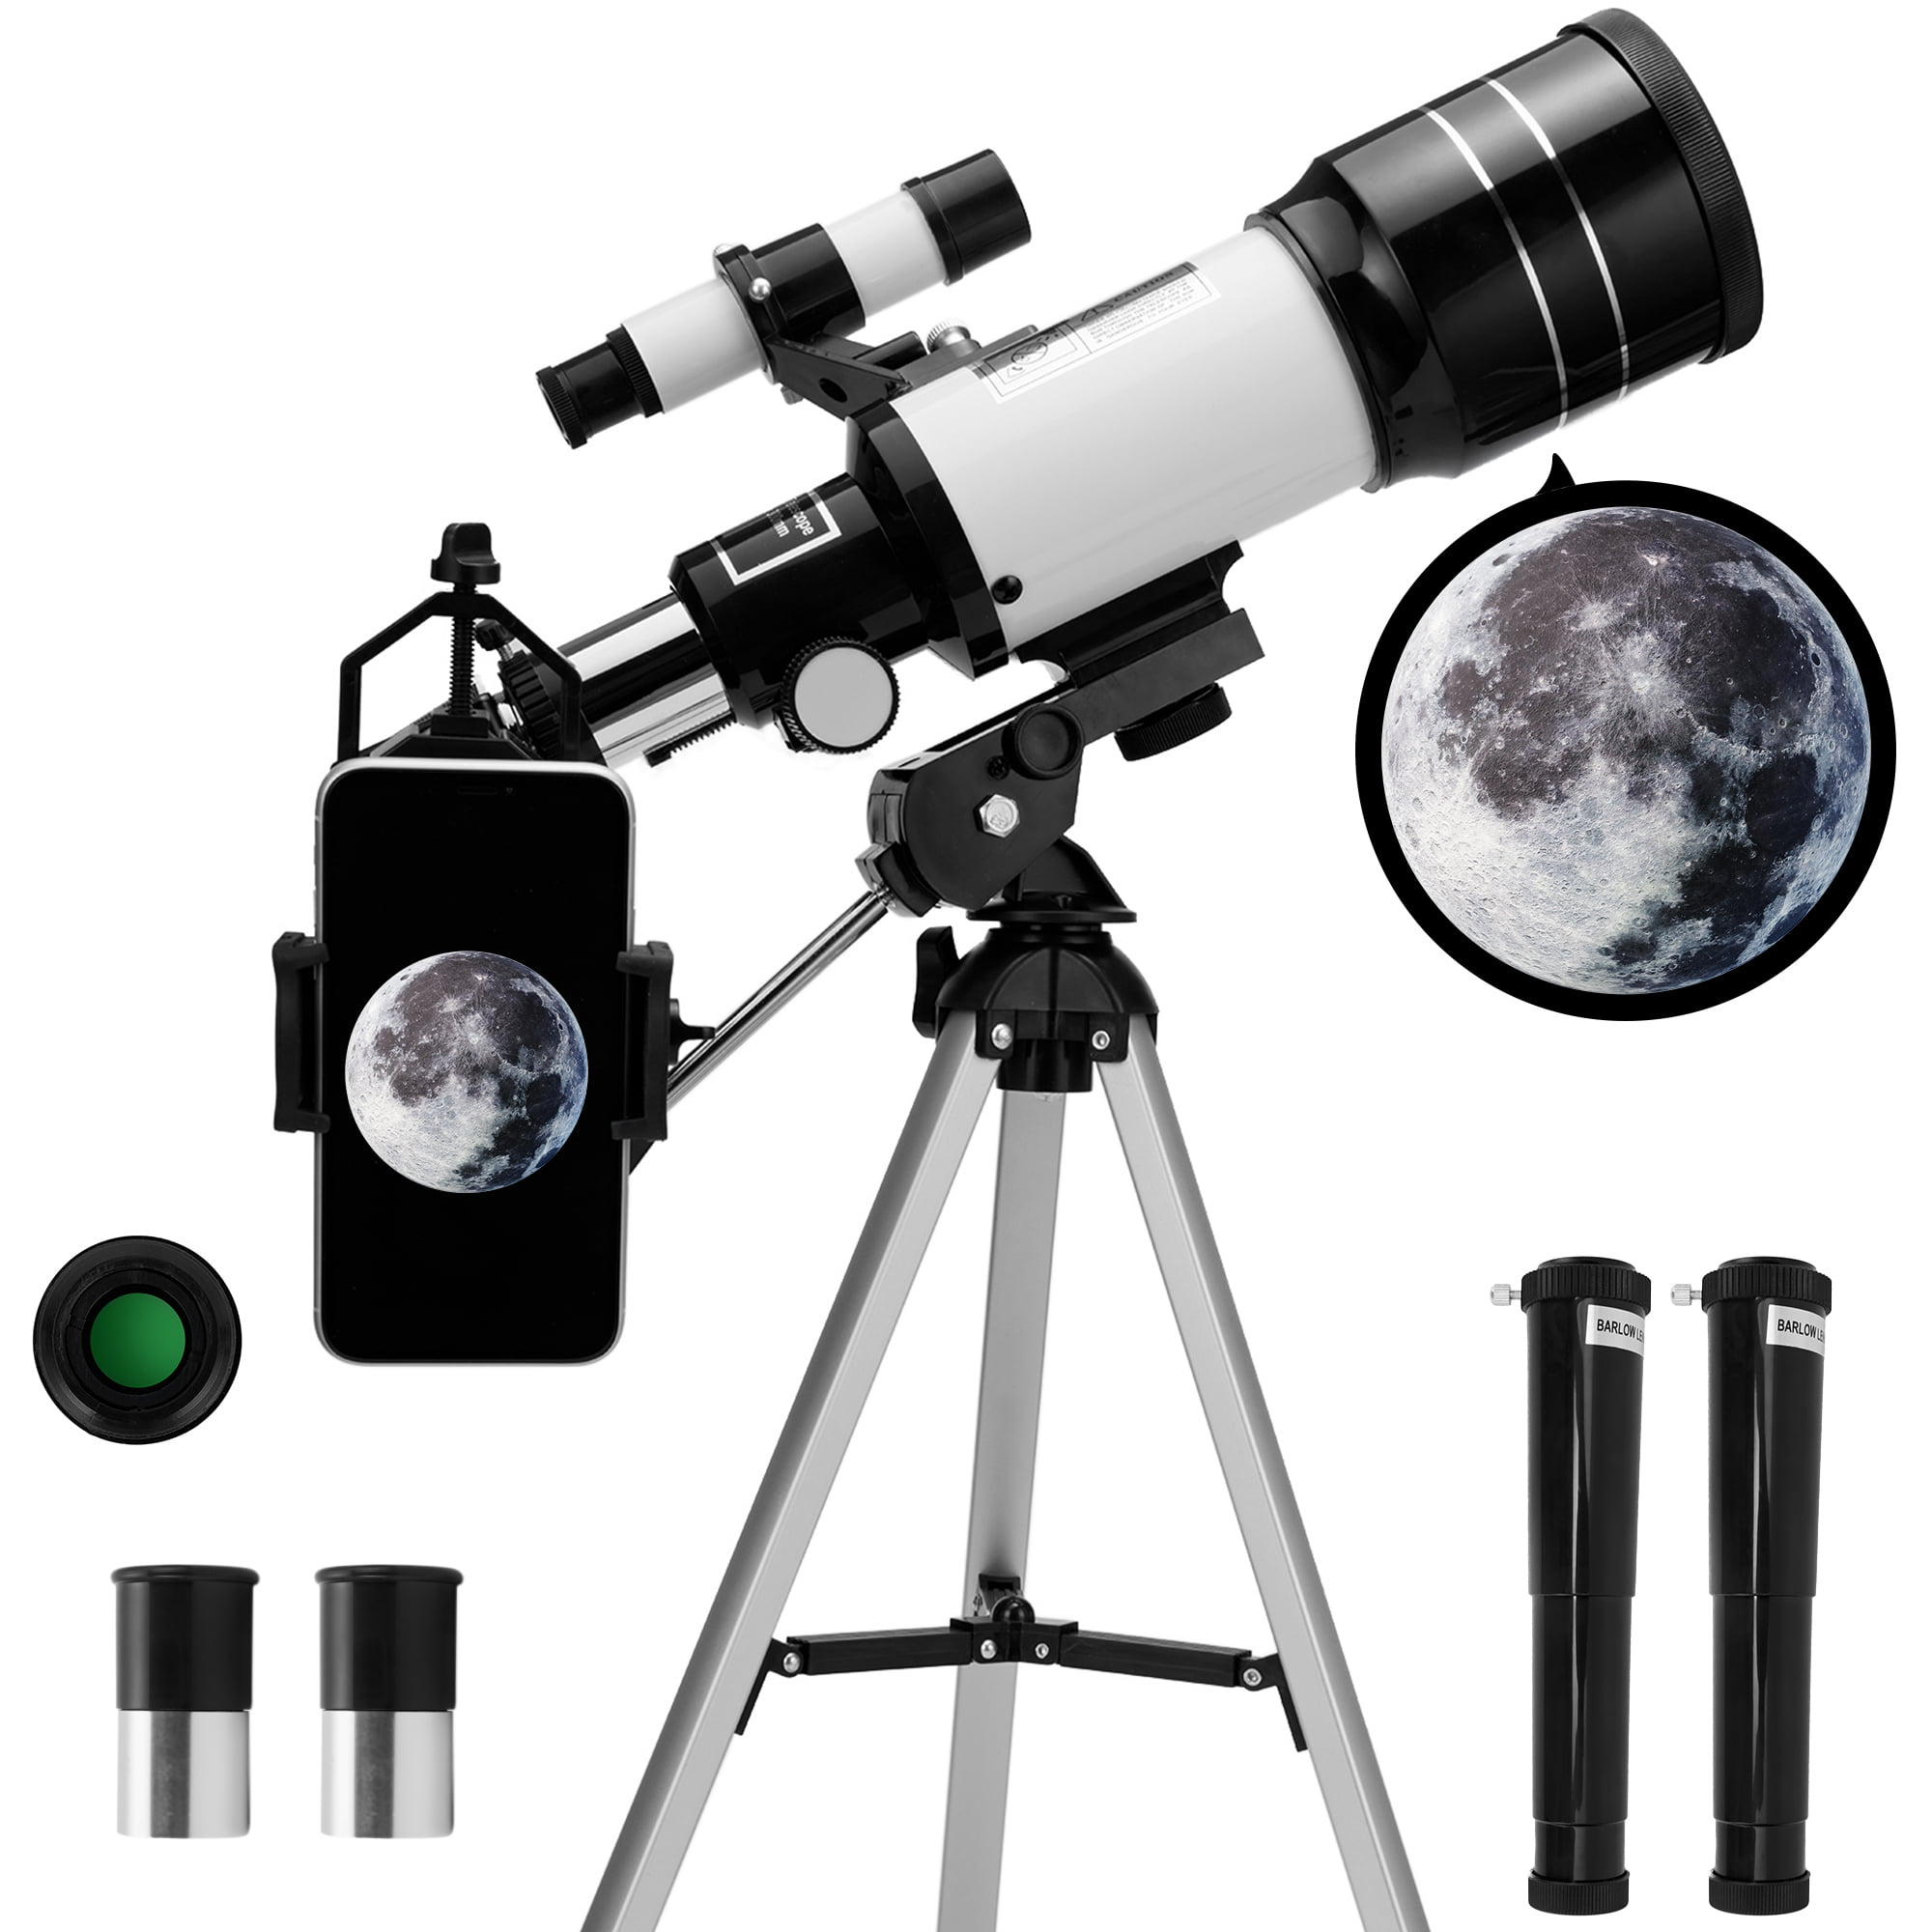 Aomekie Kids Telescope for Astronomy Beginners Refracter Telescopes with Gift Case and Tripod Gift for Kids Educational Beginners